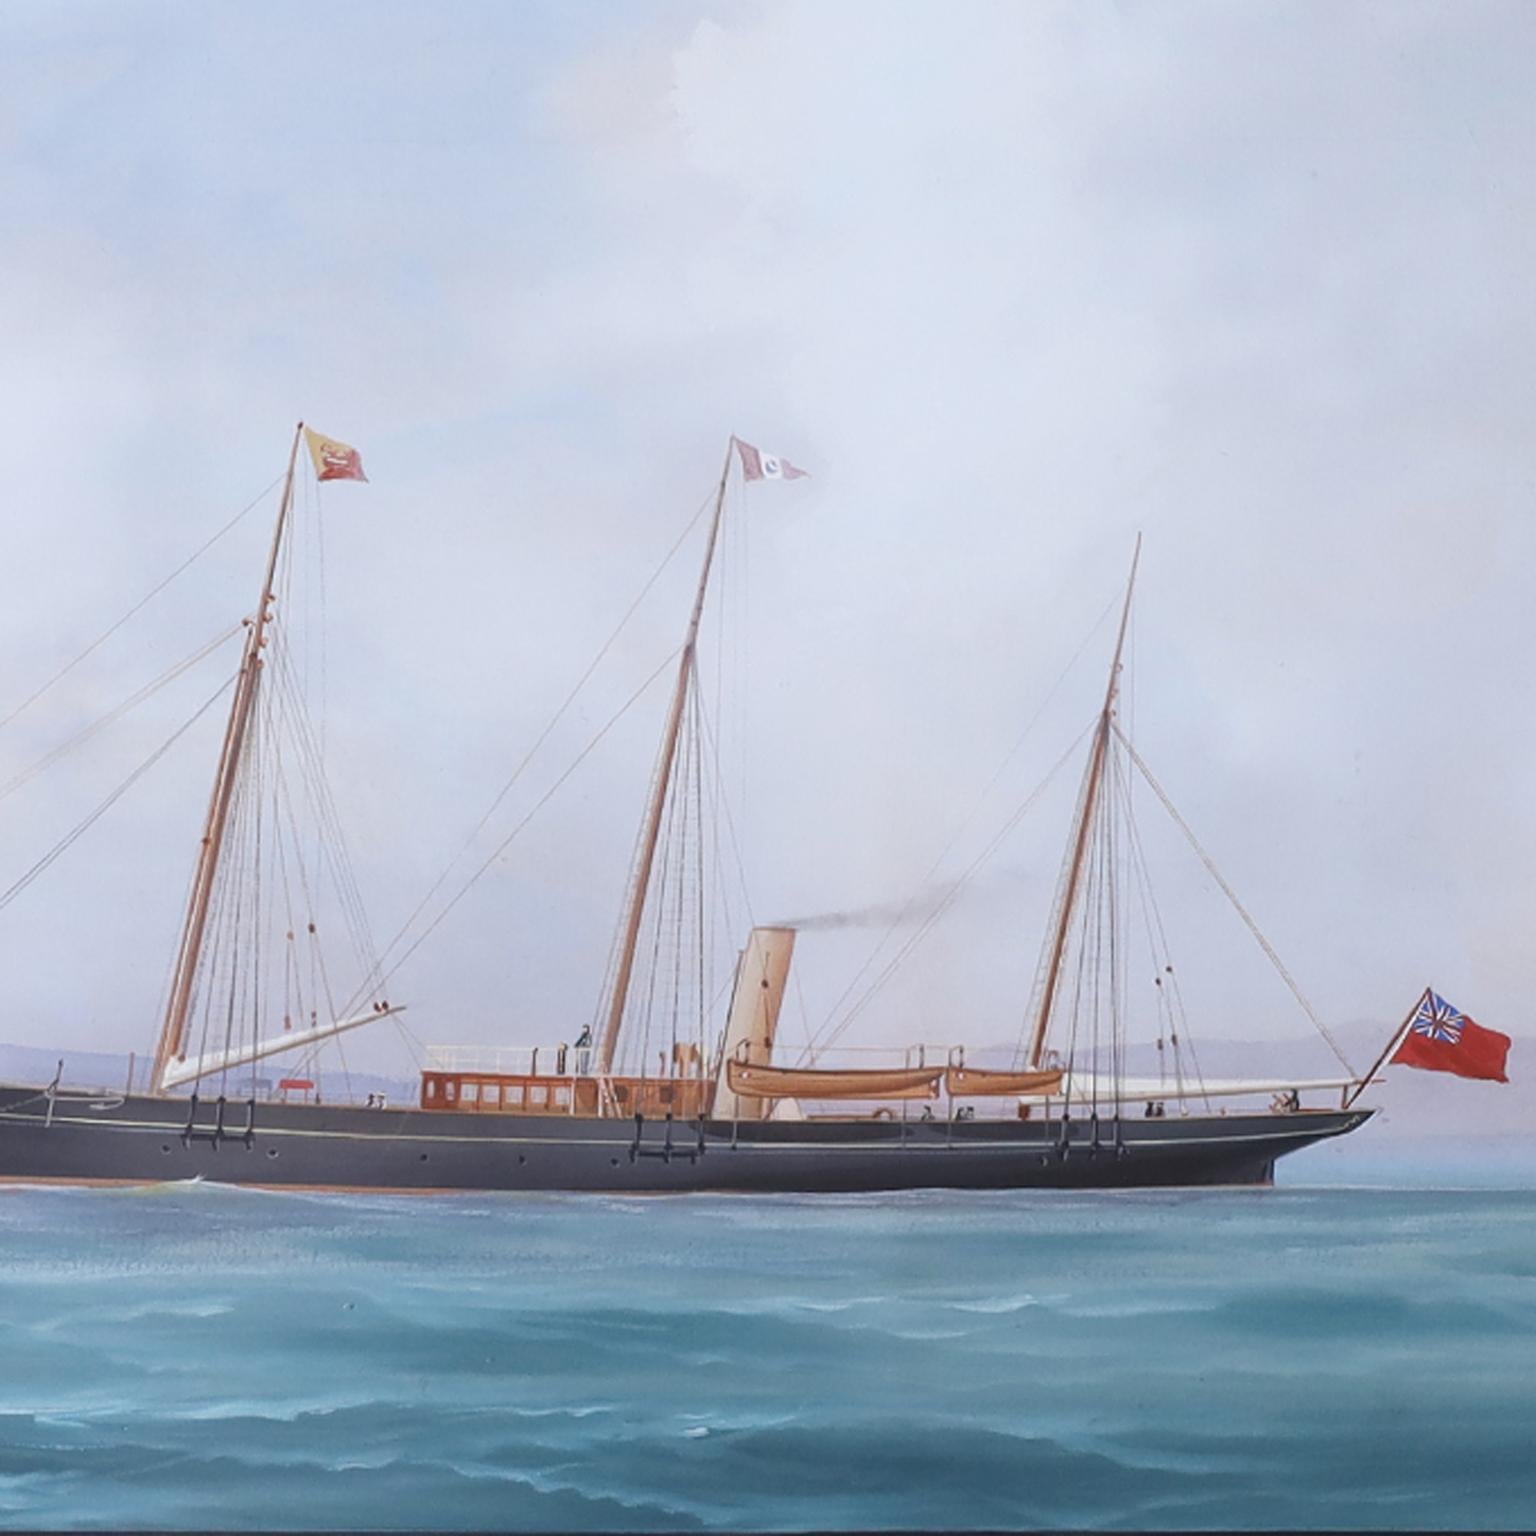 19th century painting of a steam powered yacht flying an English flag, named Lady Nell, on the Mediterranean sea with Mt. Vesuvius in the background. Executed in gouache by the noted Italian marine artist Antonio De Simone in 1888. Presented in a